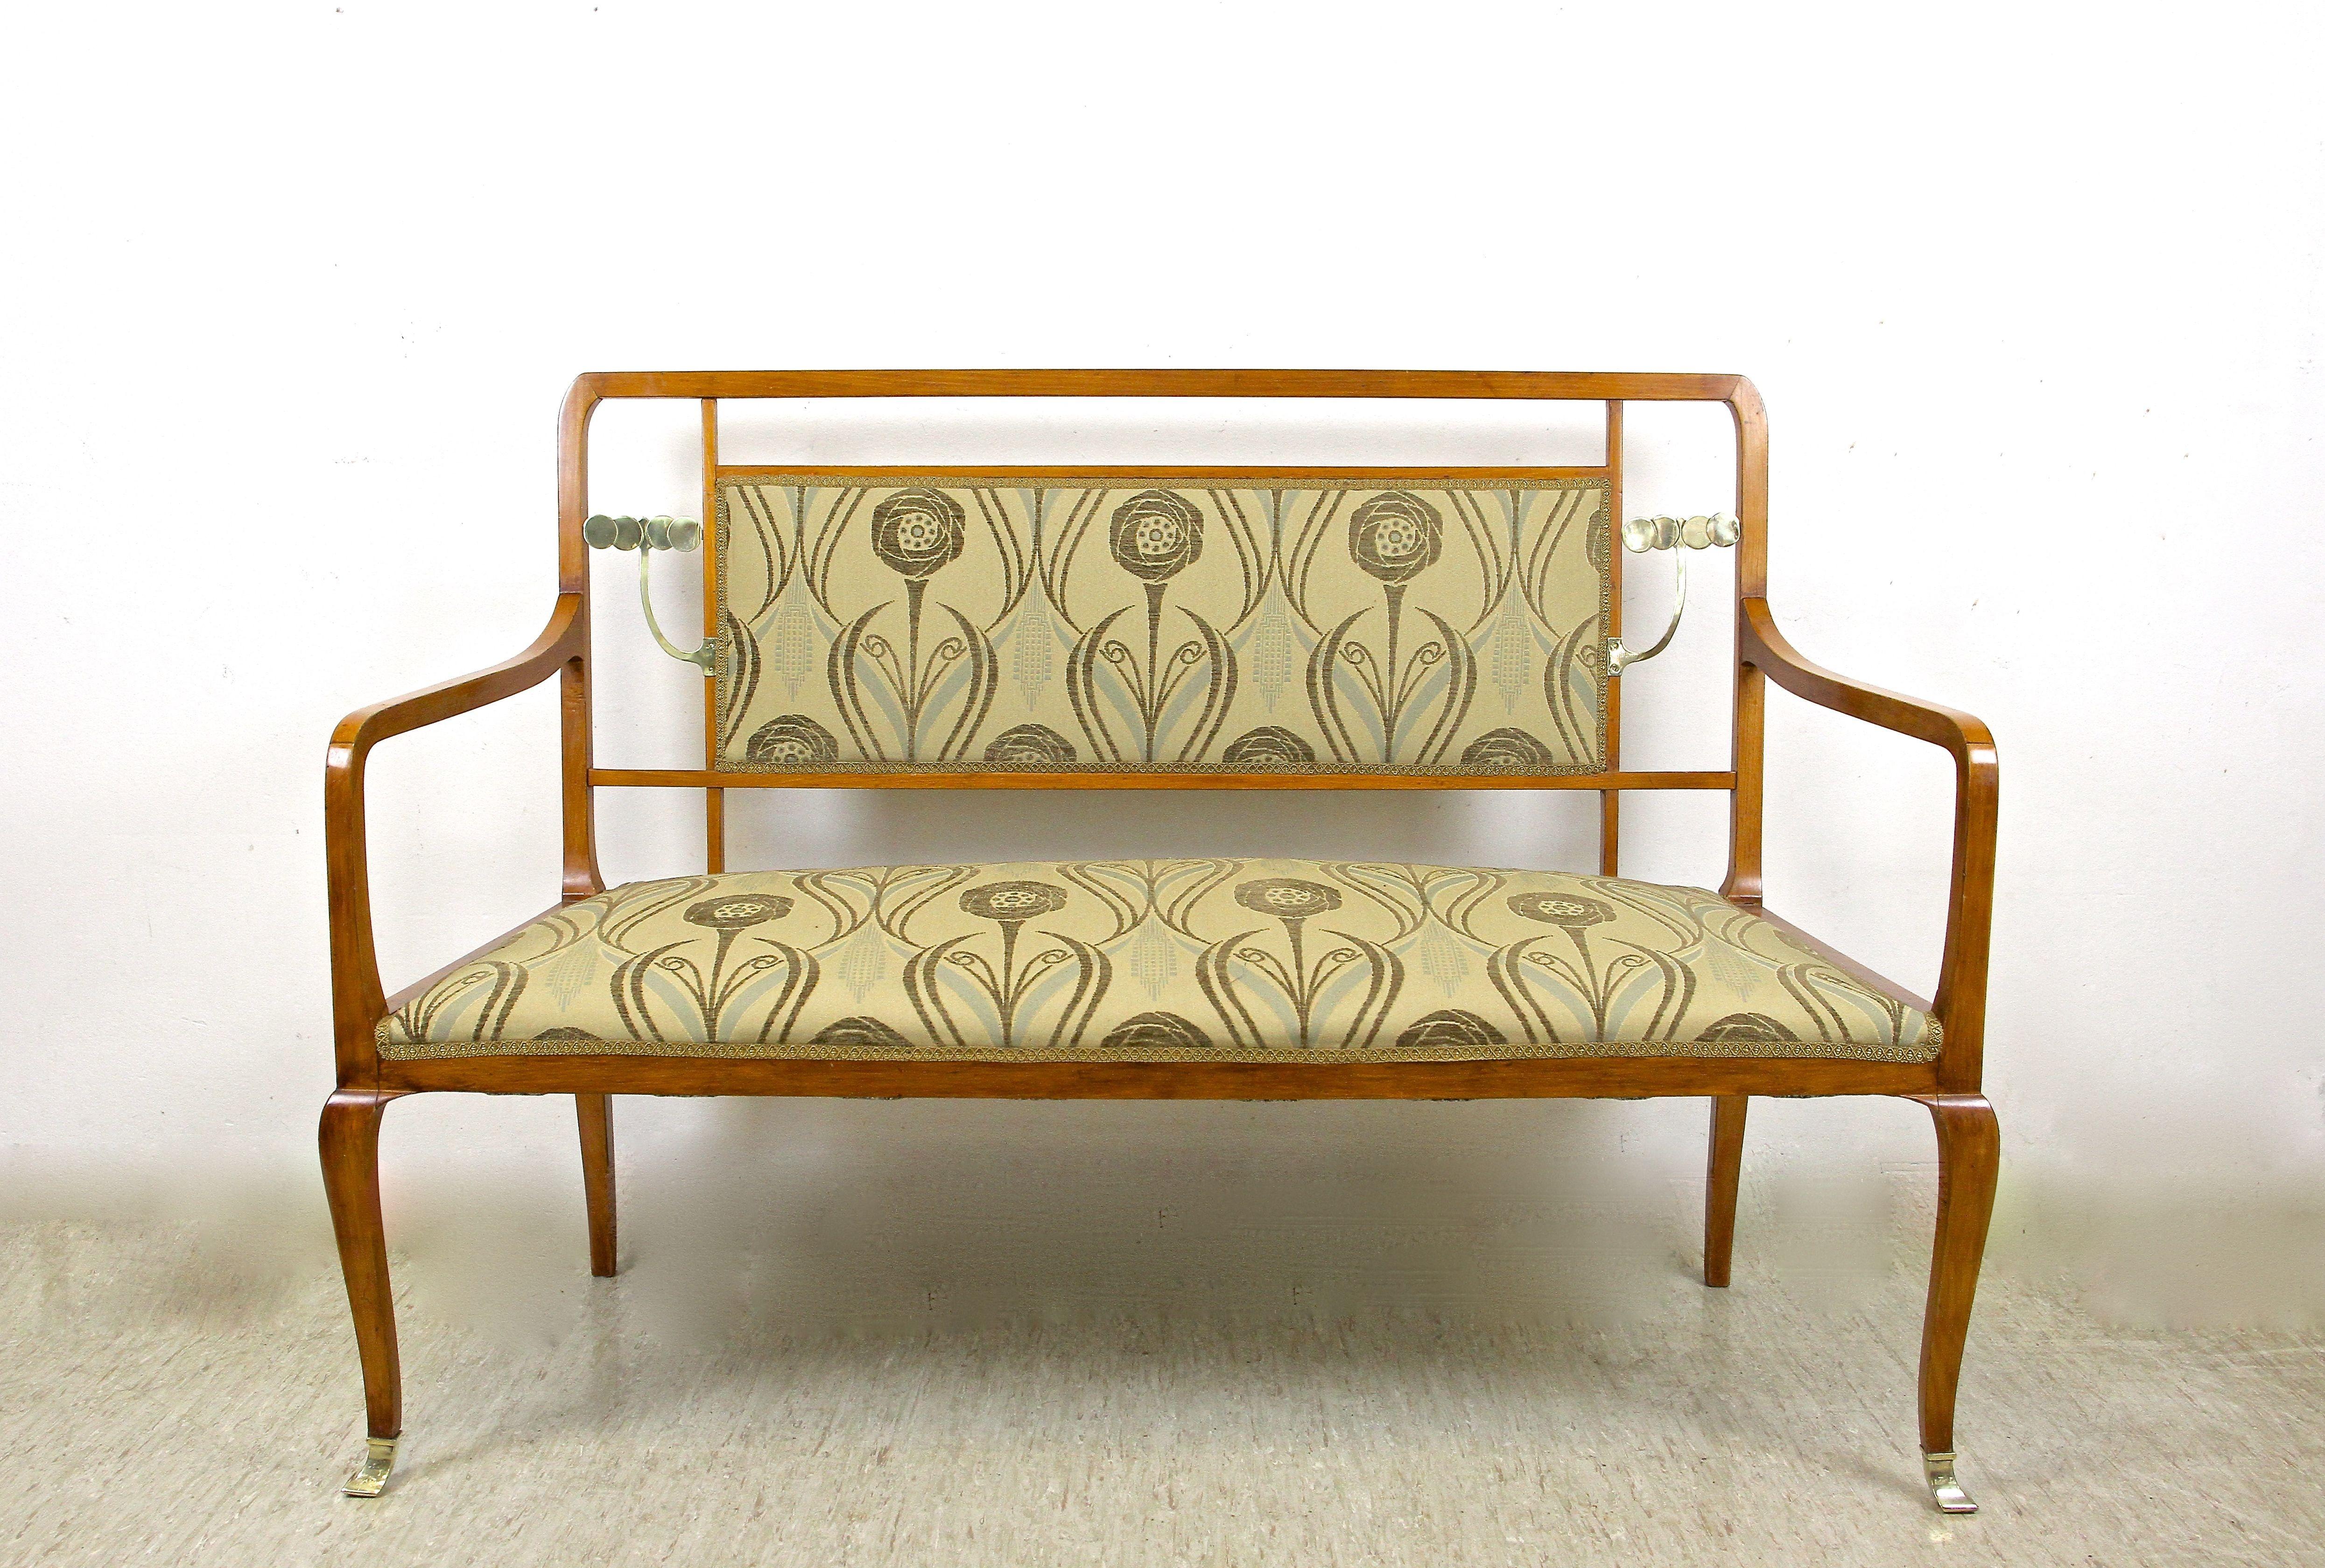 Unique Art Nouveau seating set with matching table from the period in Austria around 1910. This remarkable seating set consists of two chairs, one bench and a table. Made of fine beech wood which has been trimmed to a great looking cherry tone, this